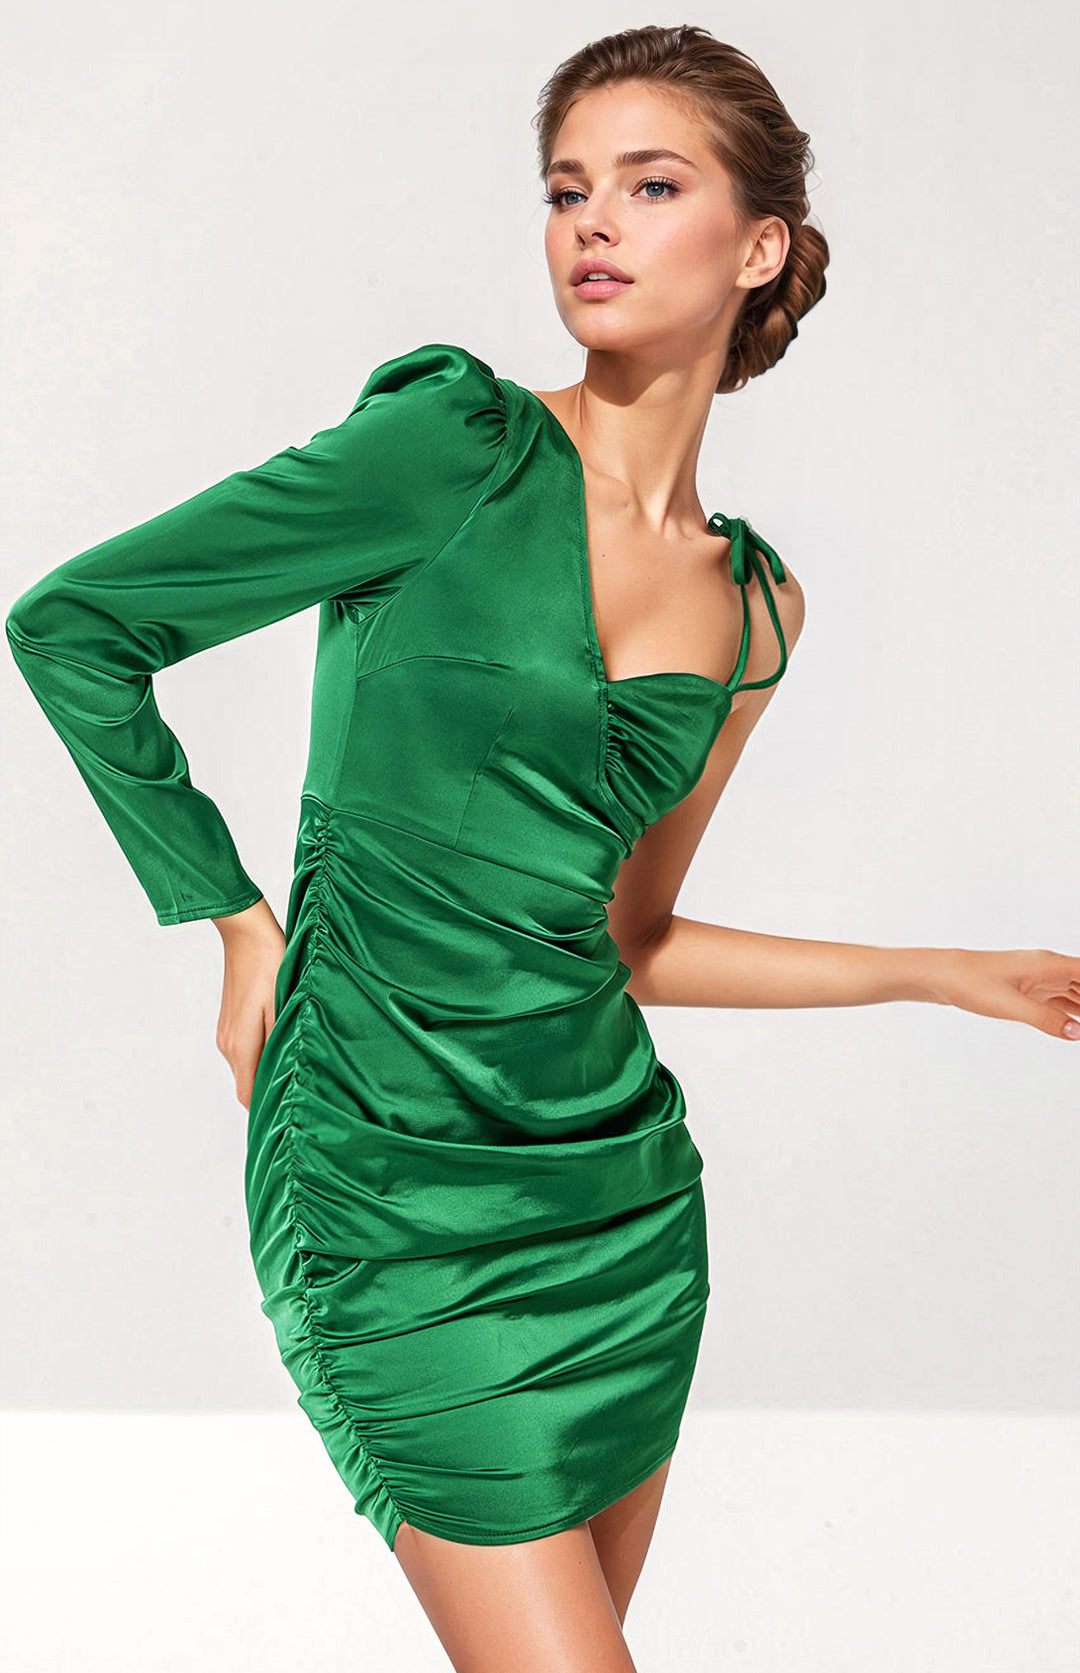 Green with Envy Cocktail Dress